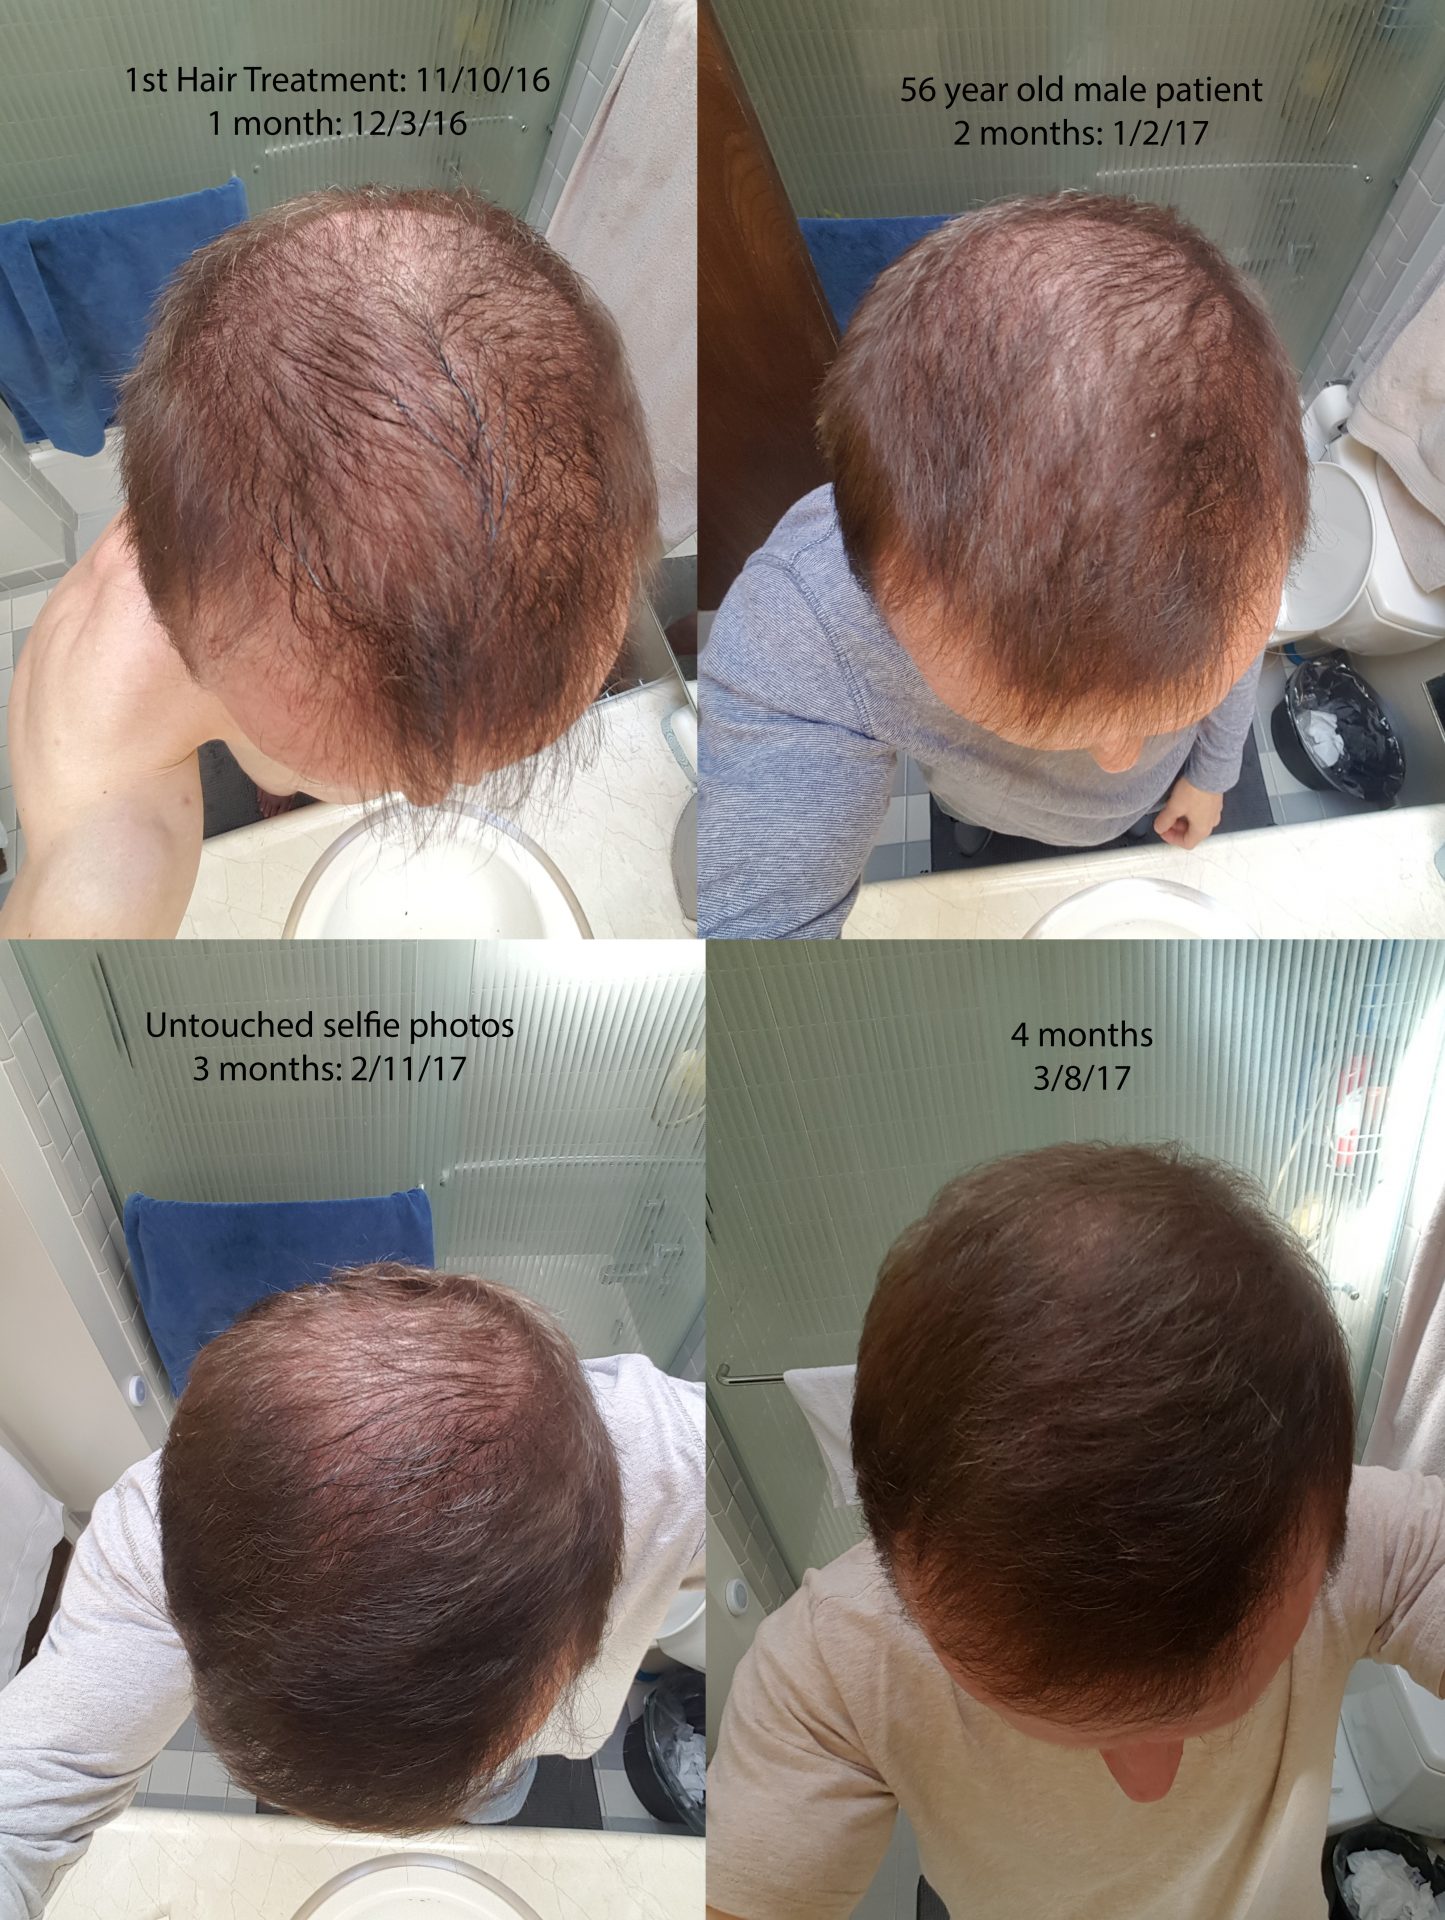 ACell + PRP Hair Regrowth Therapy Delivers Real Results - Serenity MedSpa